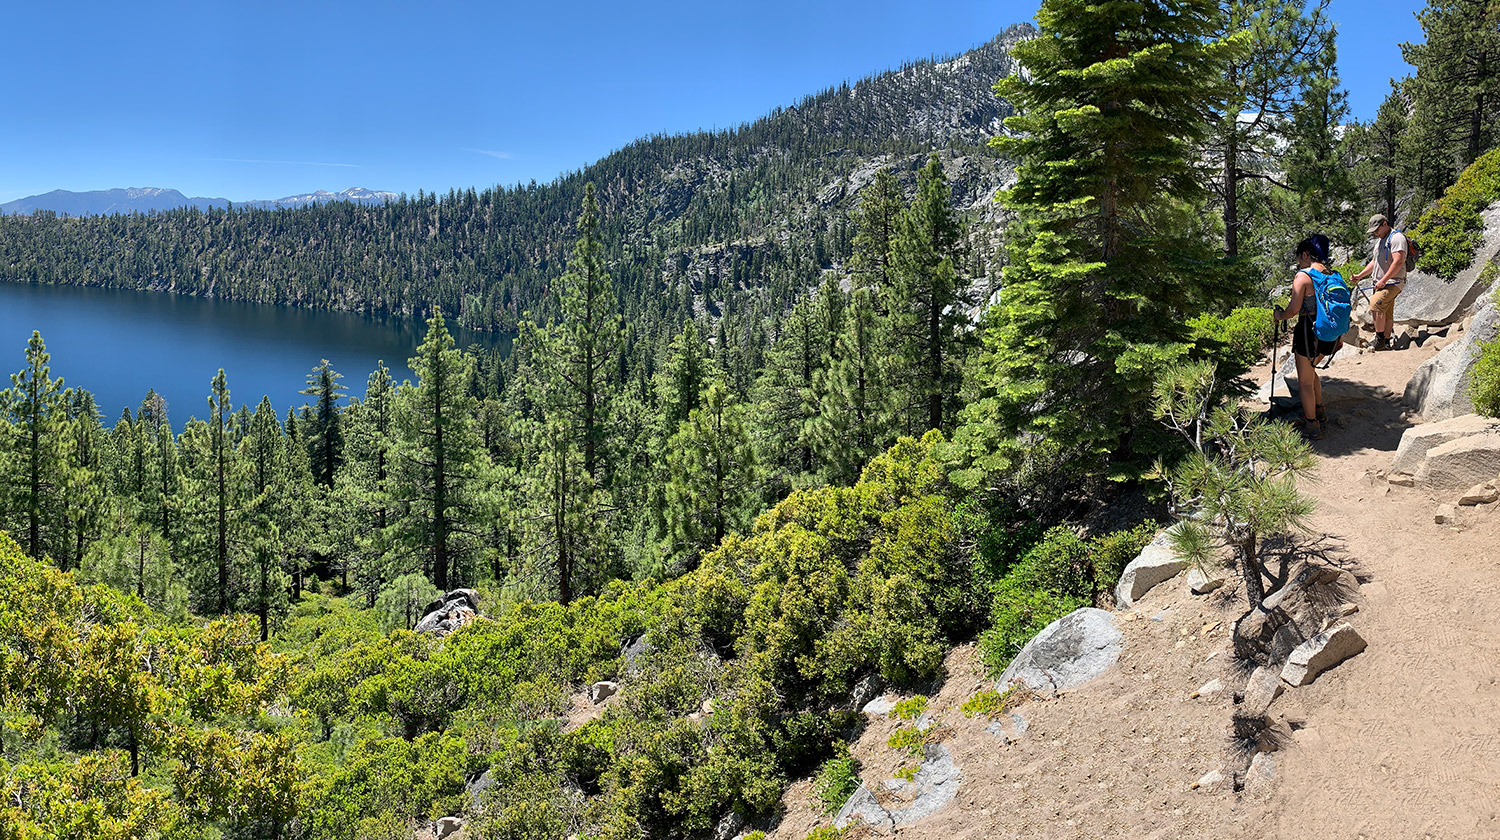 Students from CSUDH’s Tree-Ring Lab do field work in the South Lake Tahoe area in June, 2019.